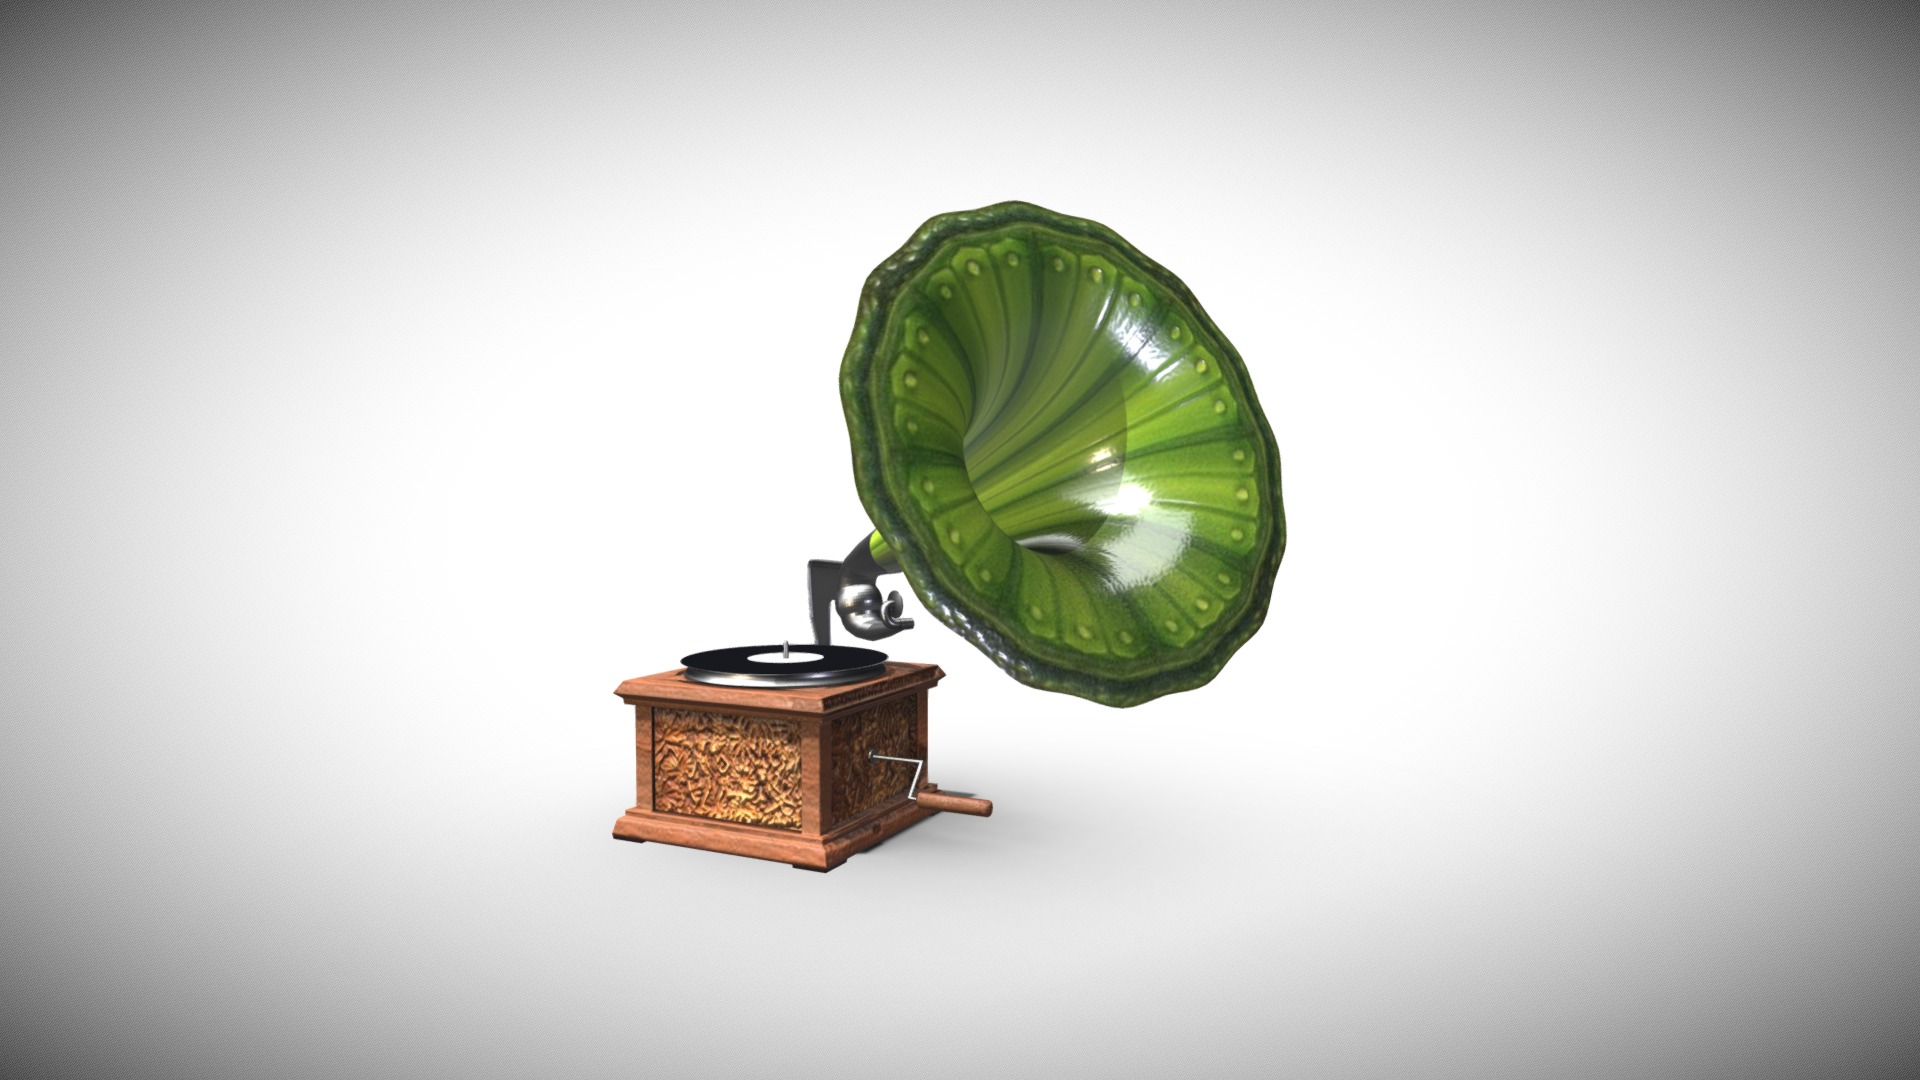 3D model Phonographe - This is a 3D model of the Phonographe. The 3D model is about a green globe on a stand.